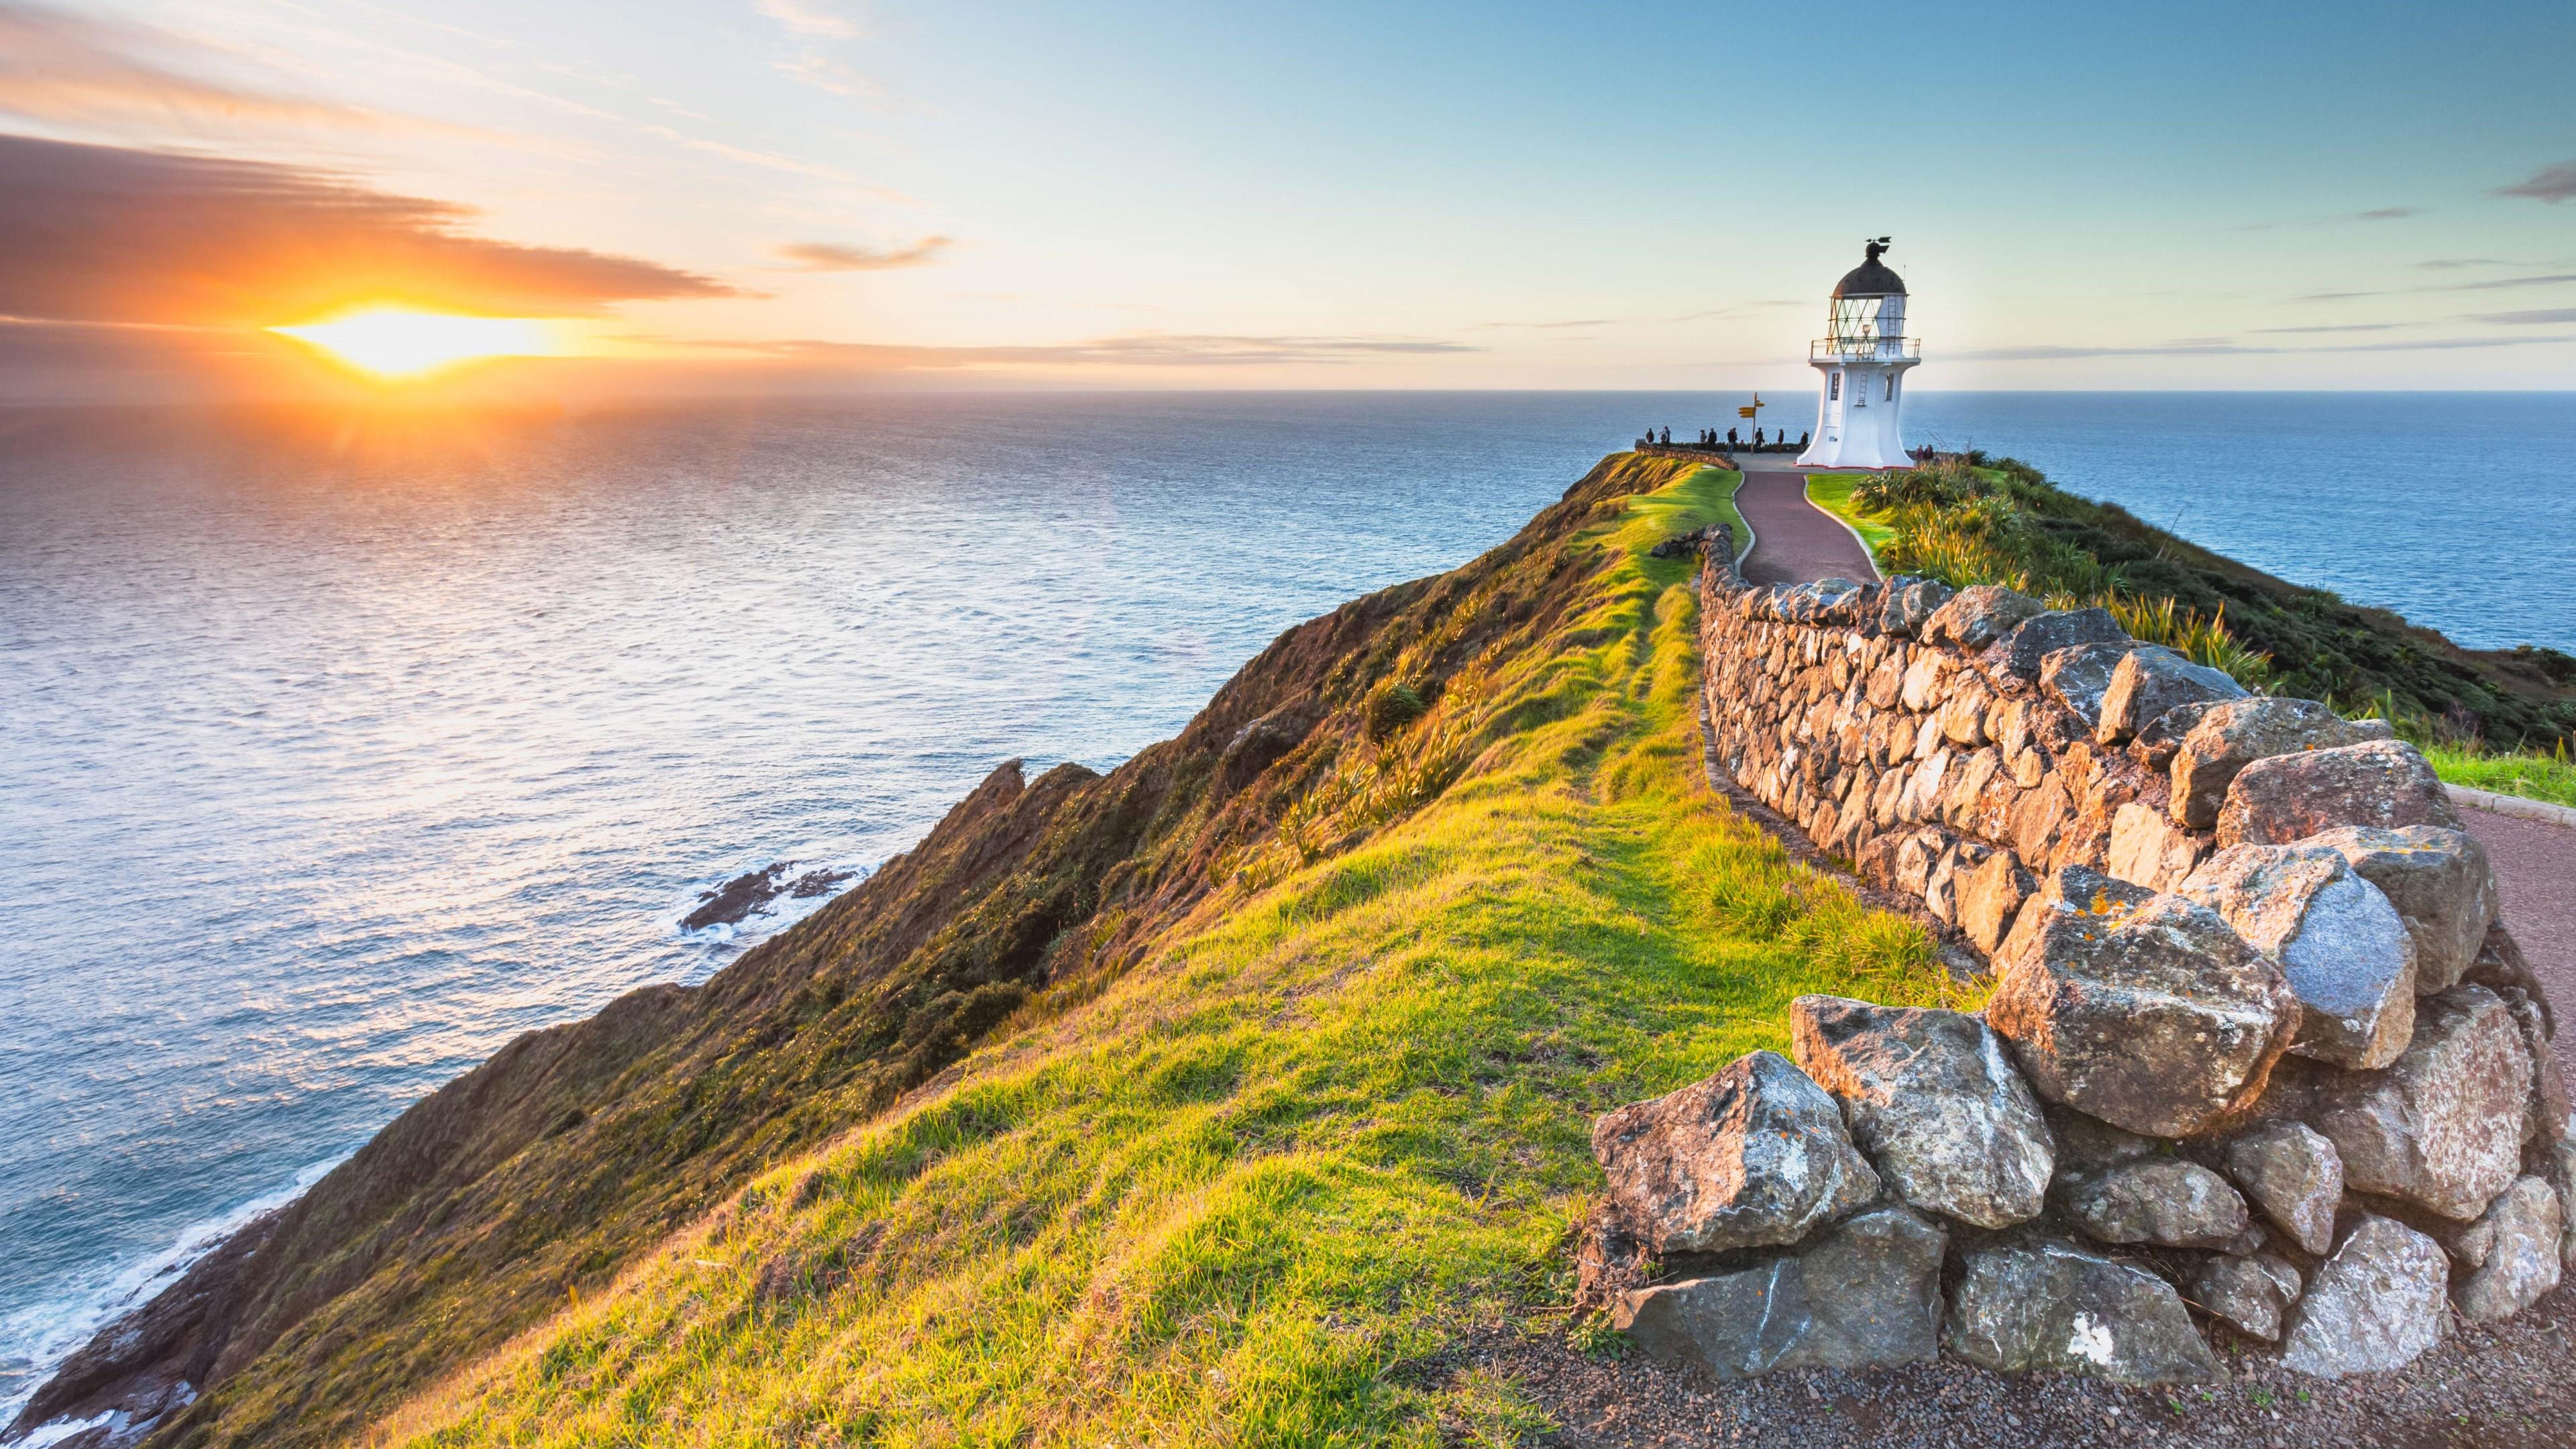 Lighthouse Cape Reinga In New Zealand Wallpapers Hd Images ...